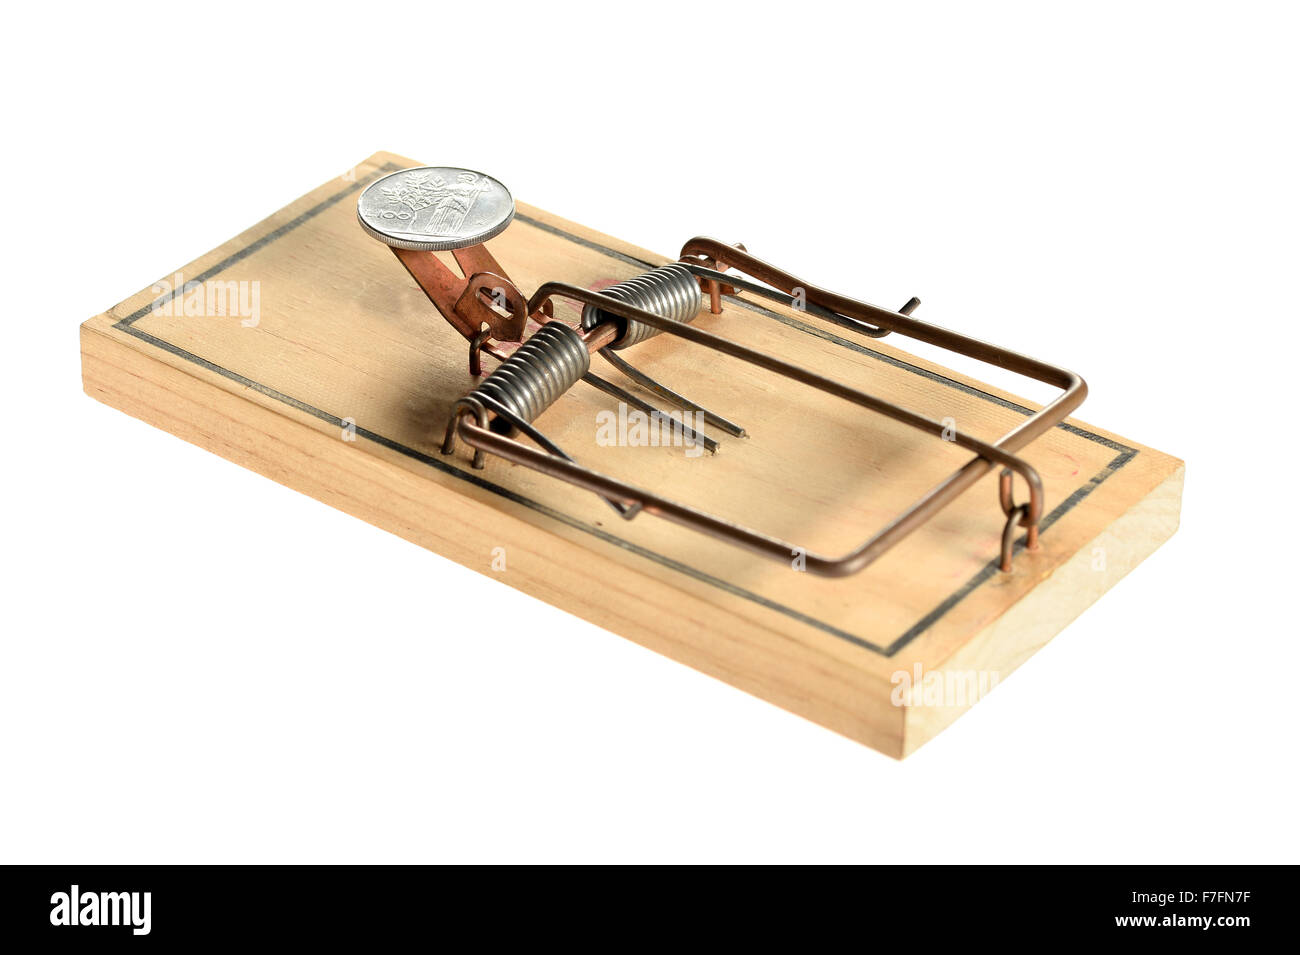 Mousetrap with silver coin as bait isolated over white background Stock Photo